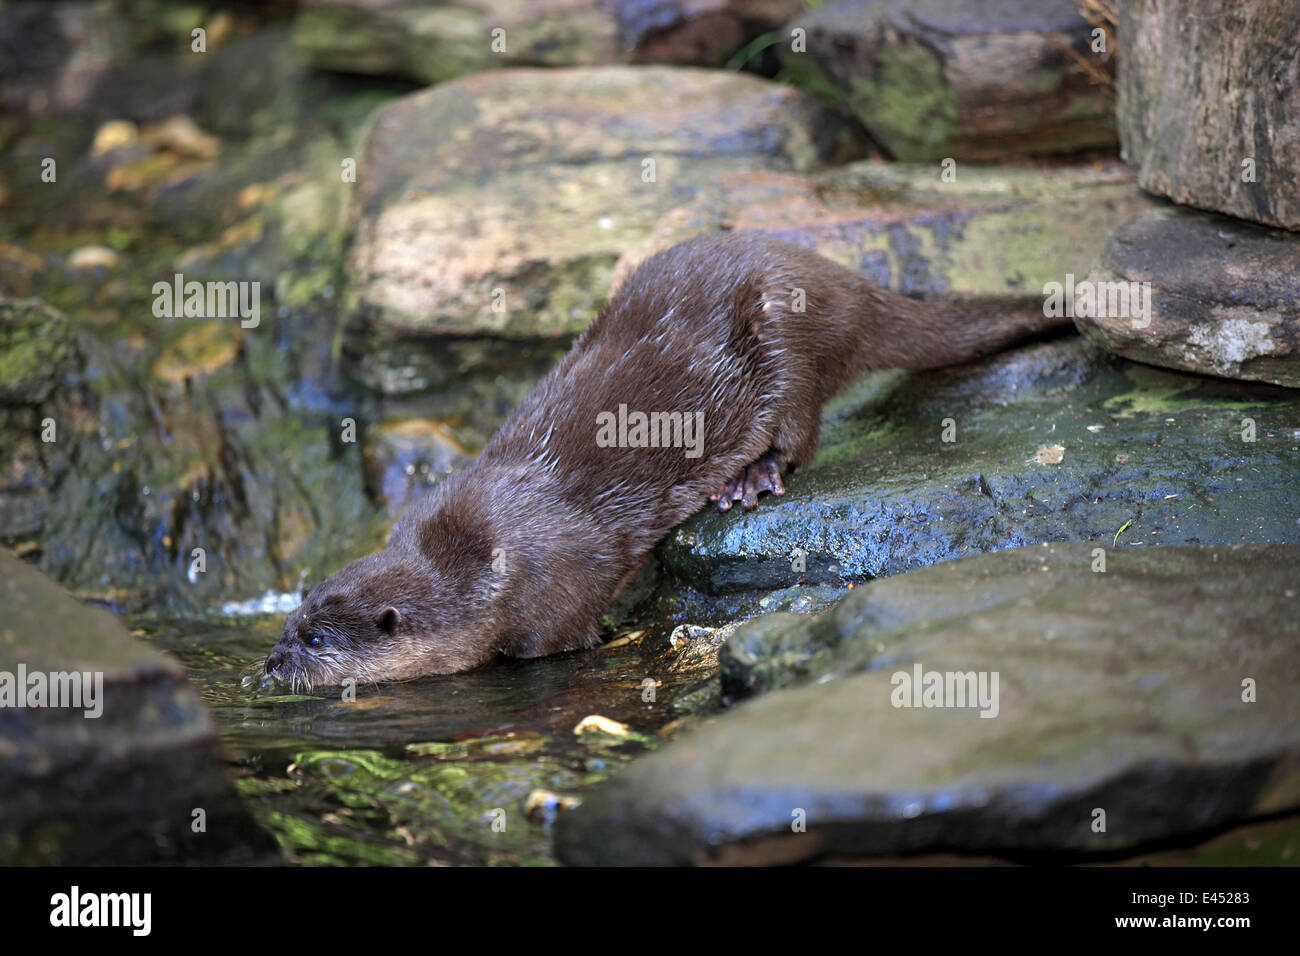 Oriental Small-clawed Otter (Amblonyx cinerea), adult, at the water, native to Asia, captive, Australia Stock Photo